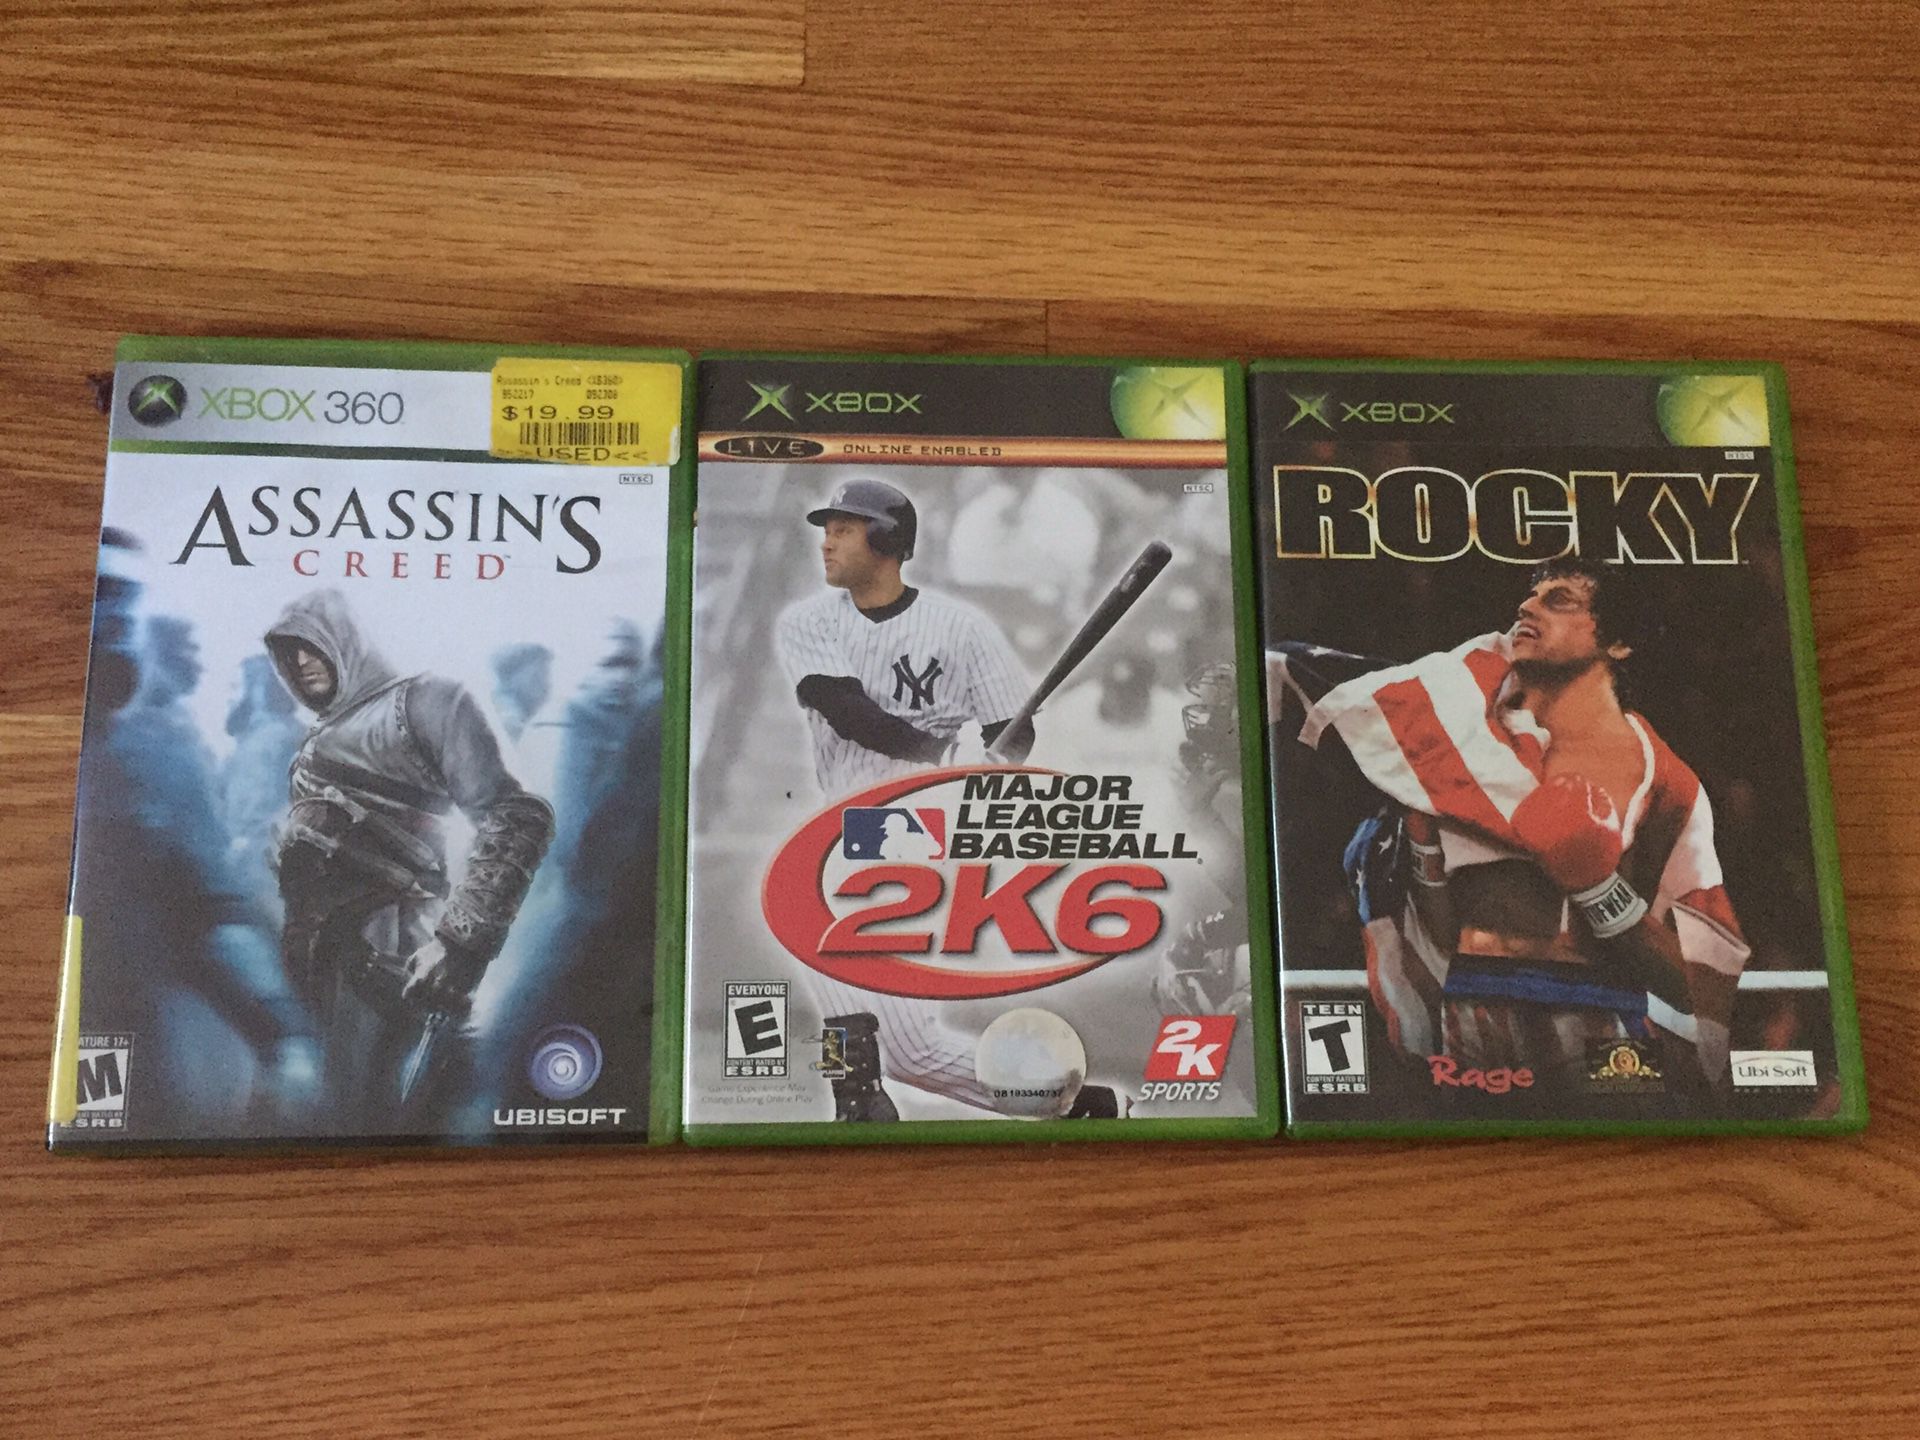 Xbox 360 Games and Xbox Games - Assassin’s Creed, MLB, Rocky